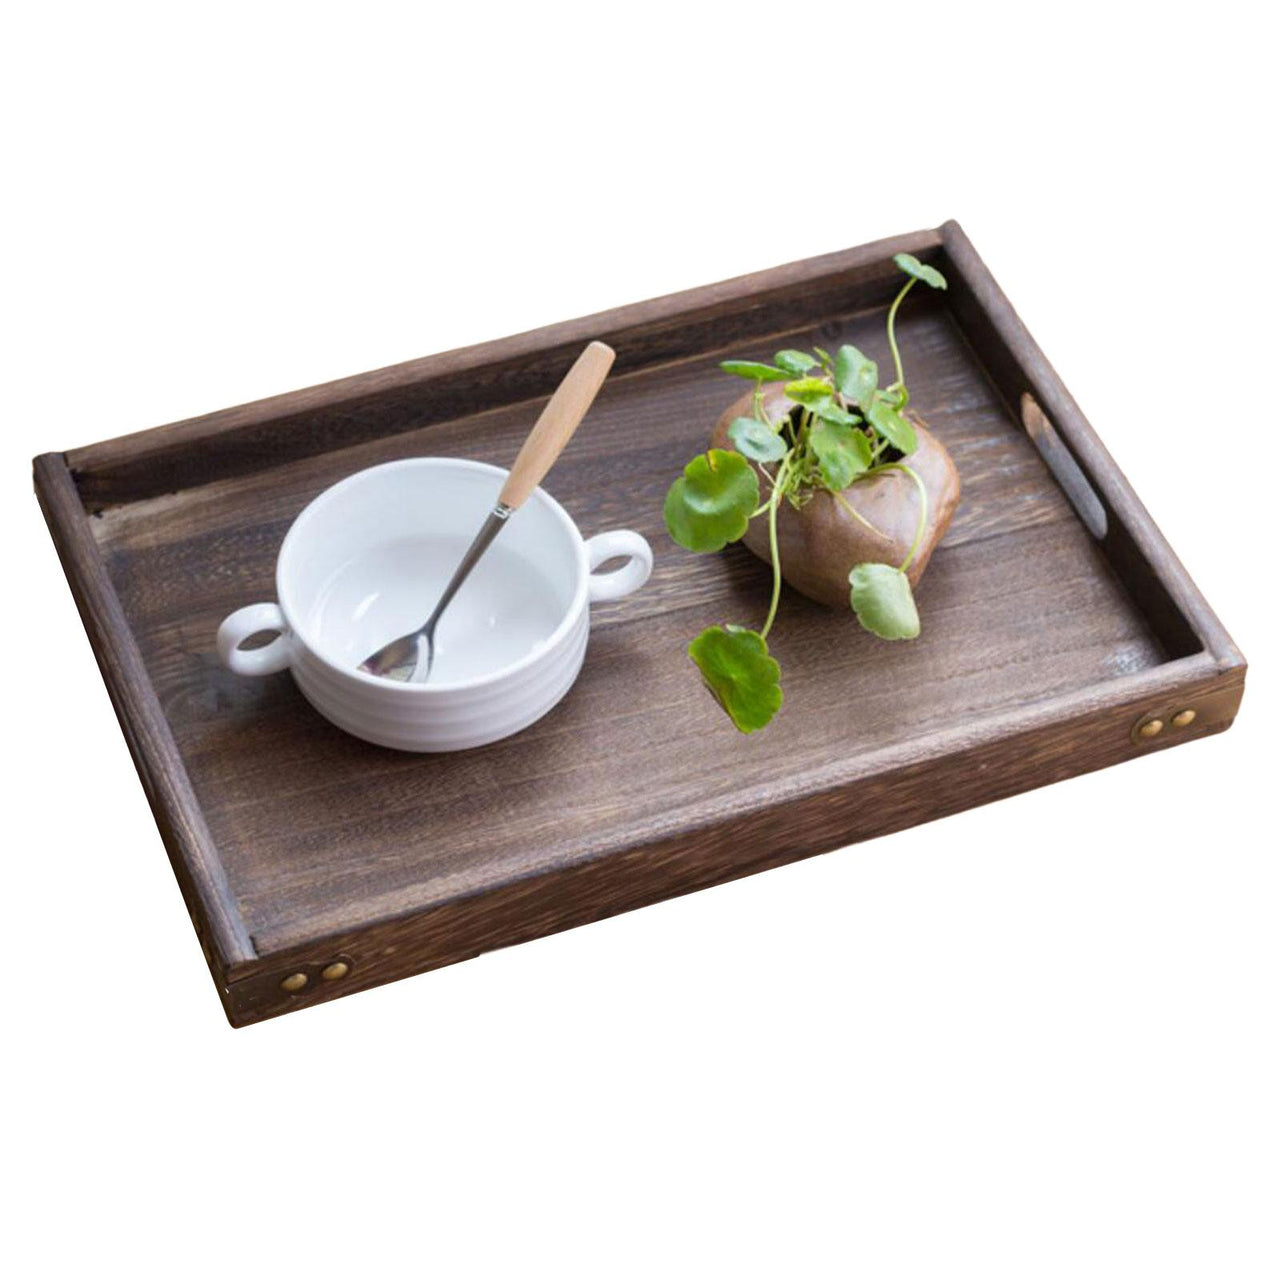 Rustic Rectangular Wooden Serving Tray with Handle